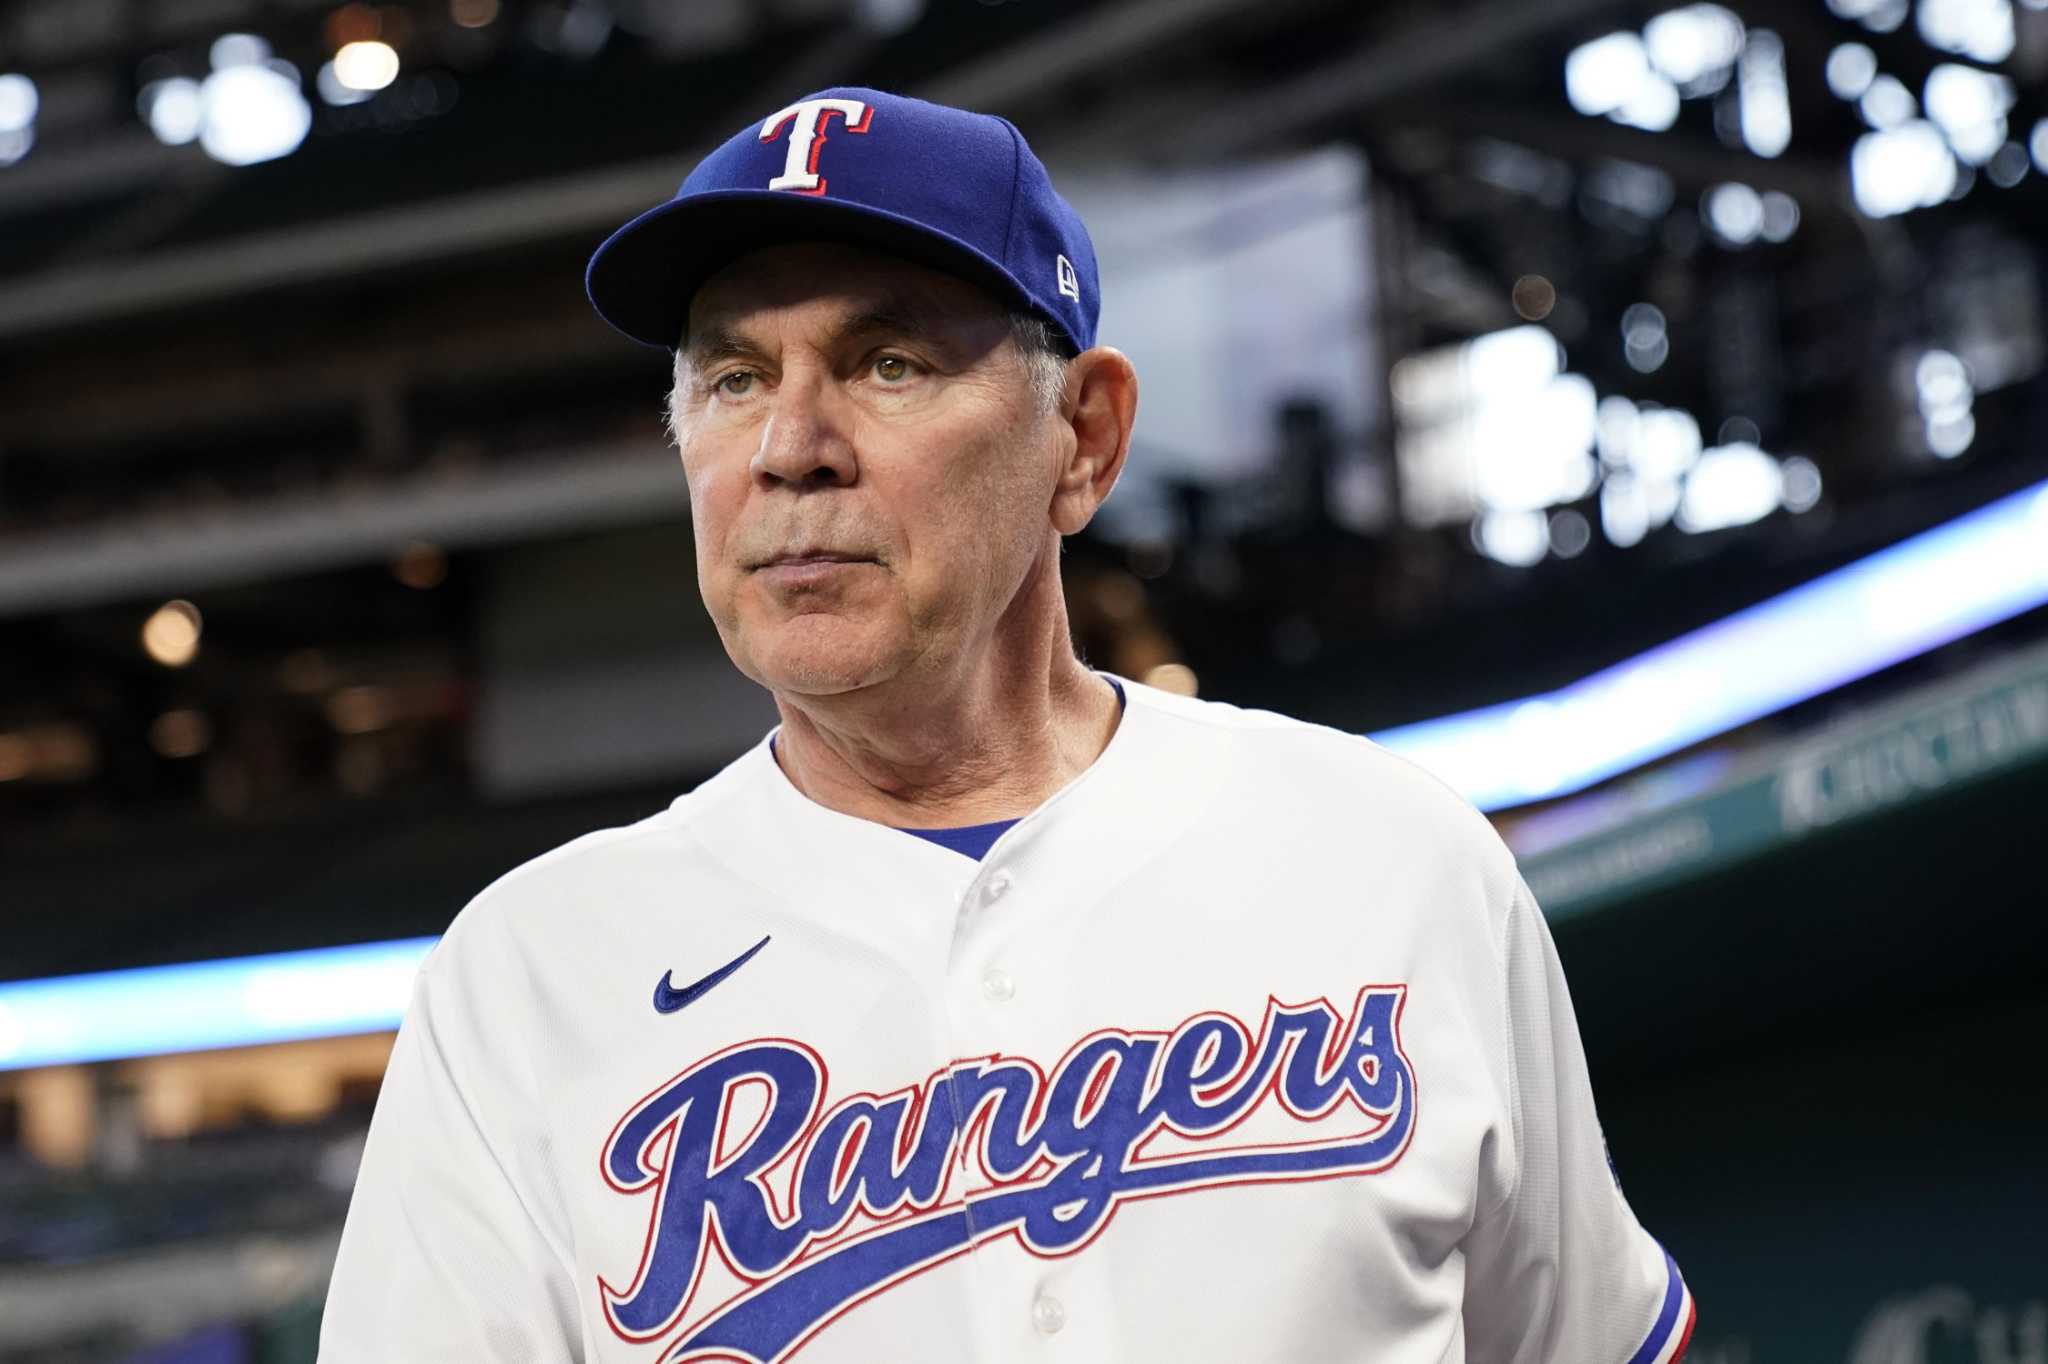 Rangers hire 3-time World Series champion Bochy as manager